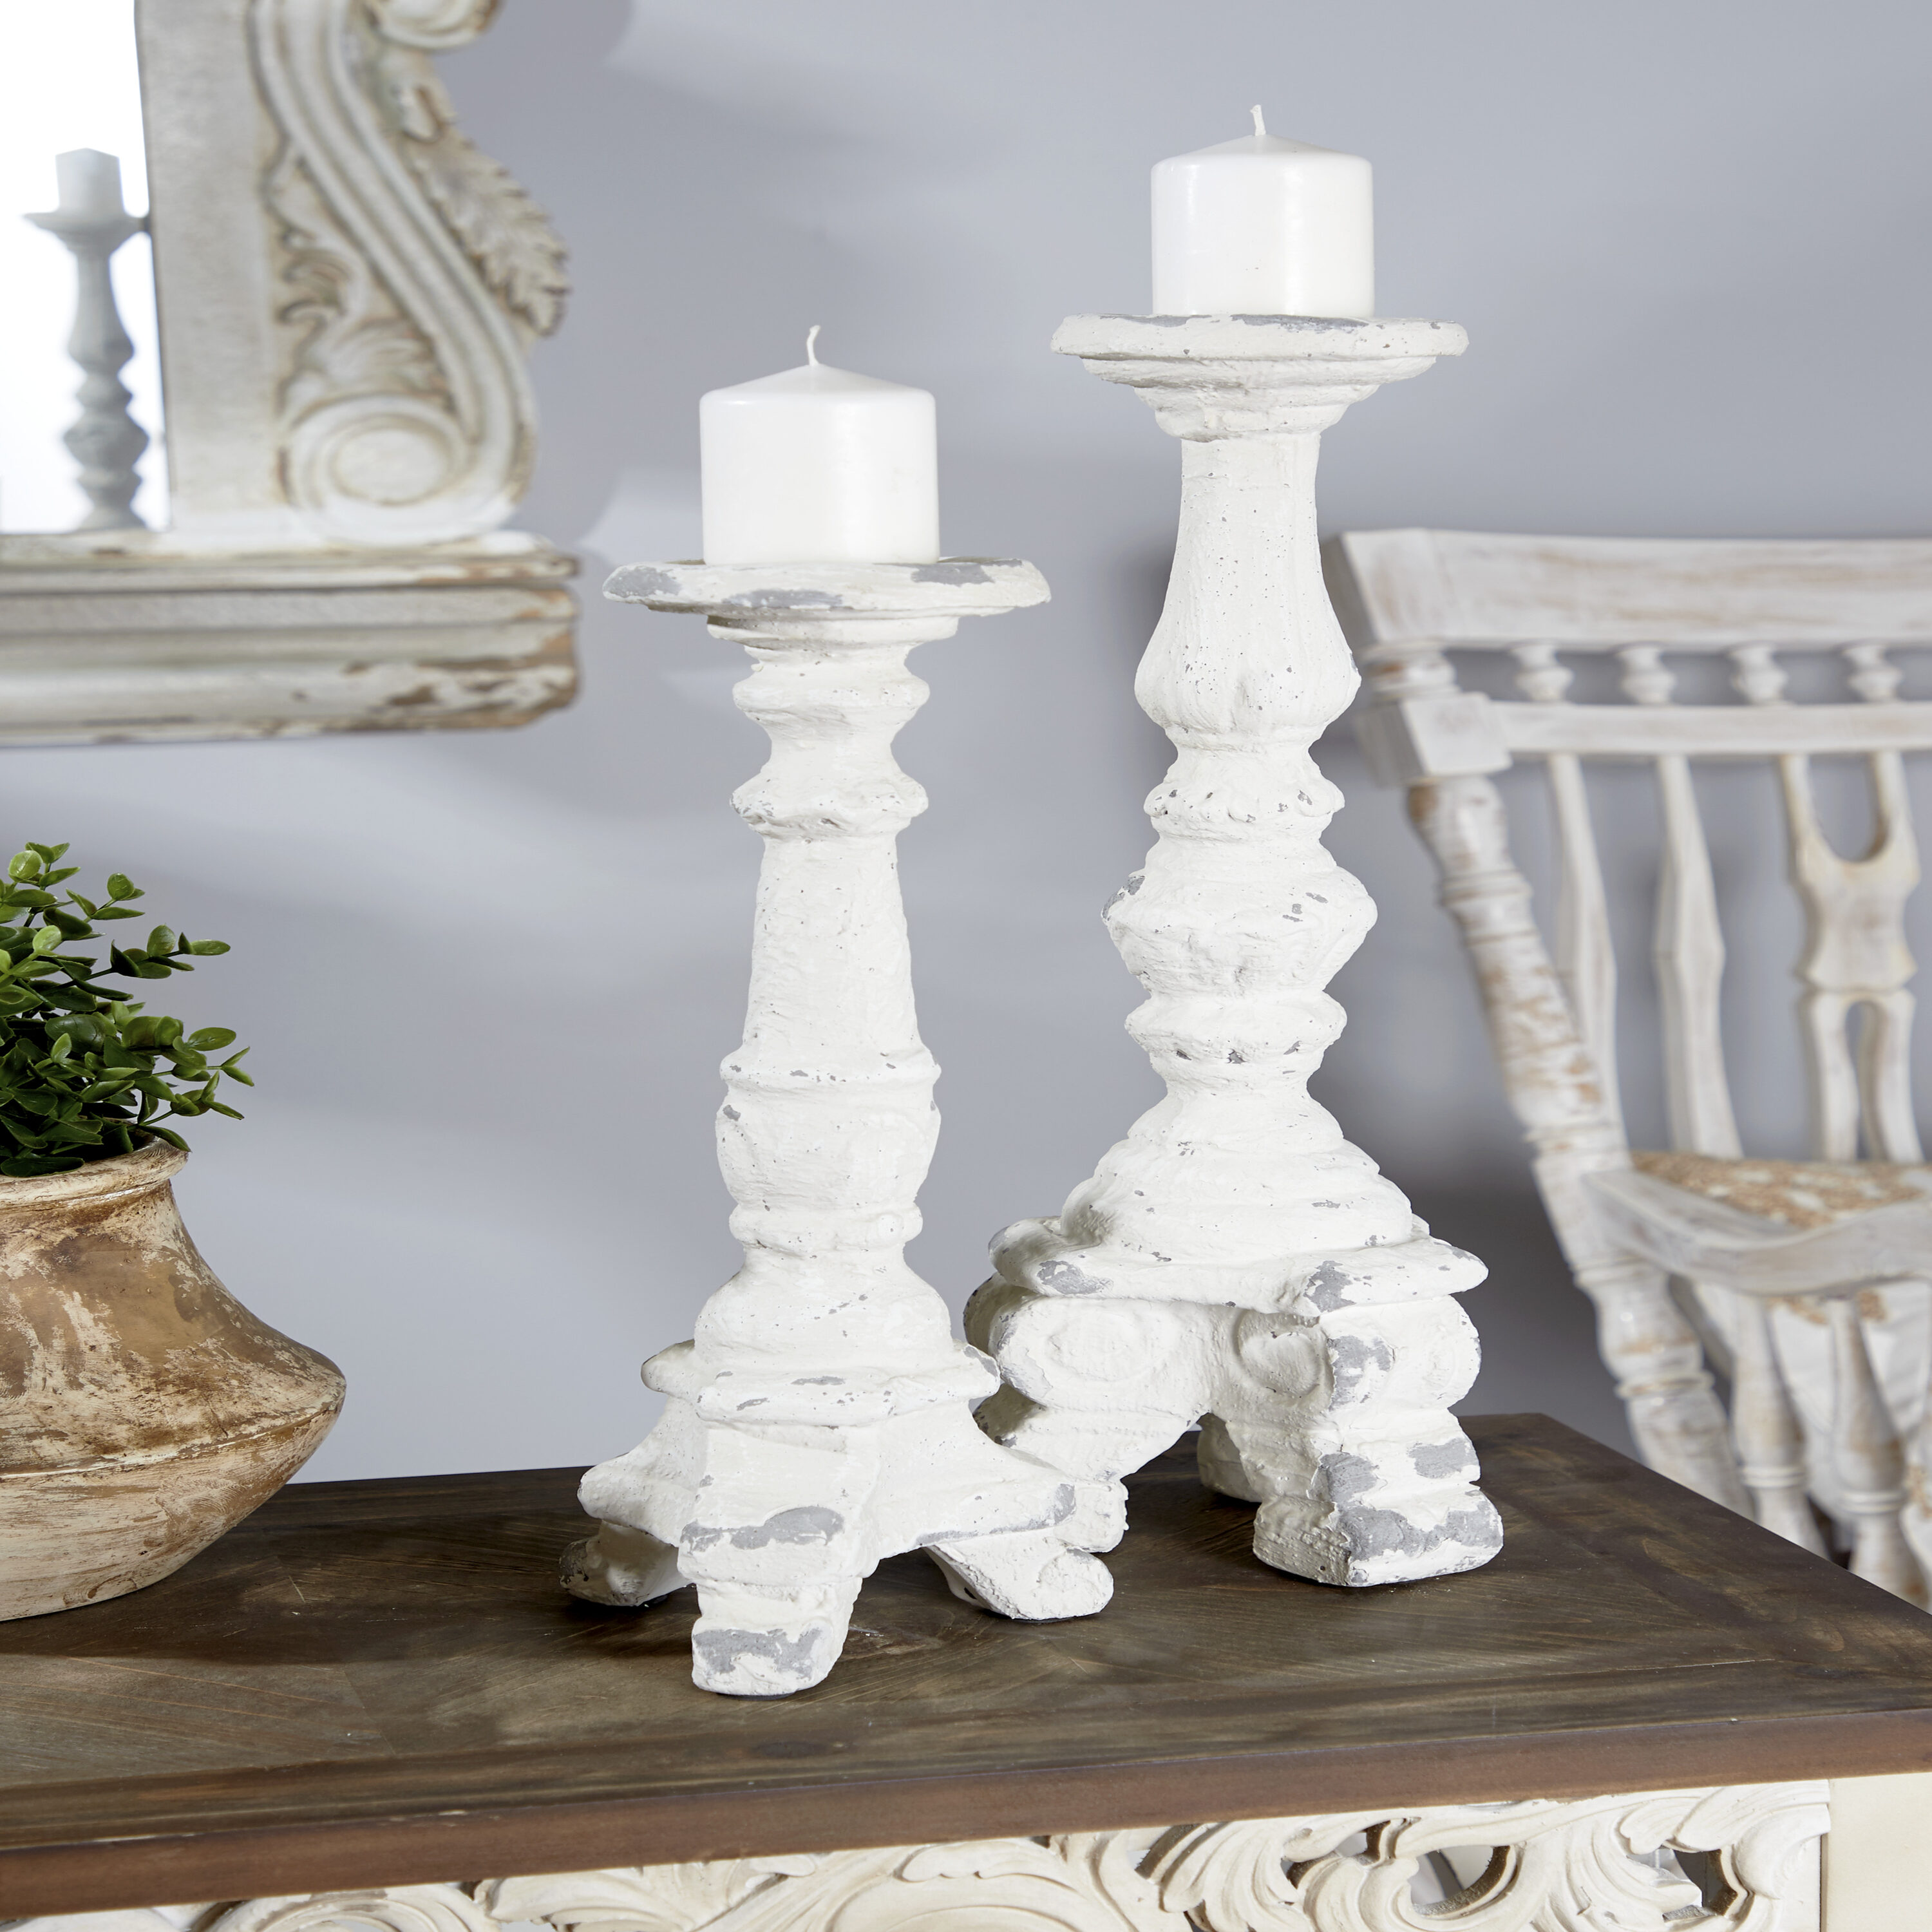 Grayson Lane 1 Candle Glass Pillar Candle Holder at Lowes.com